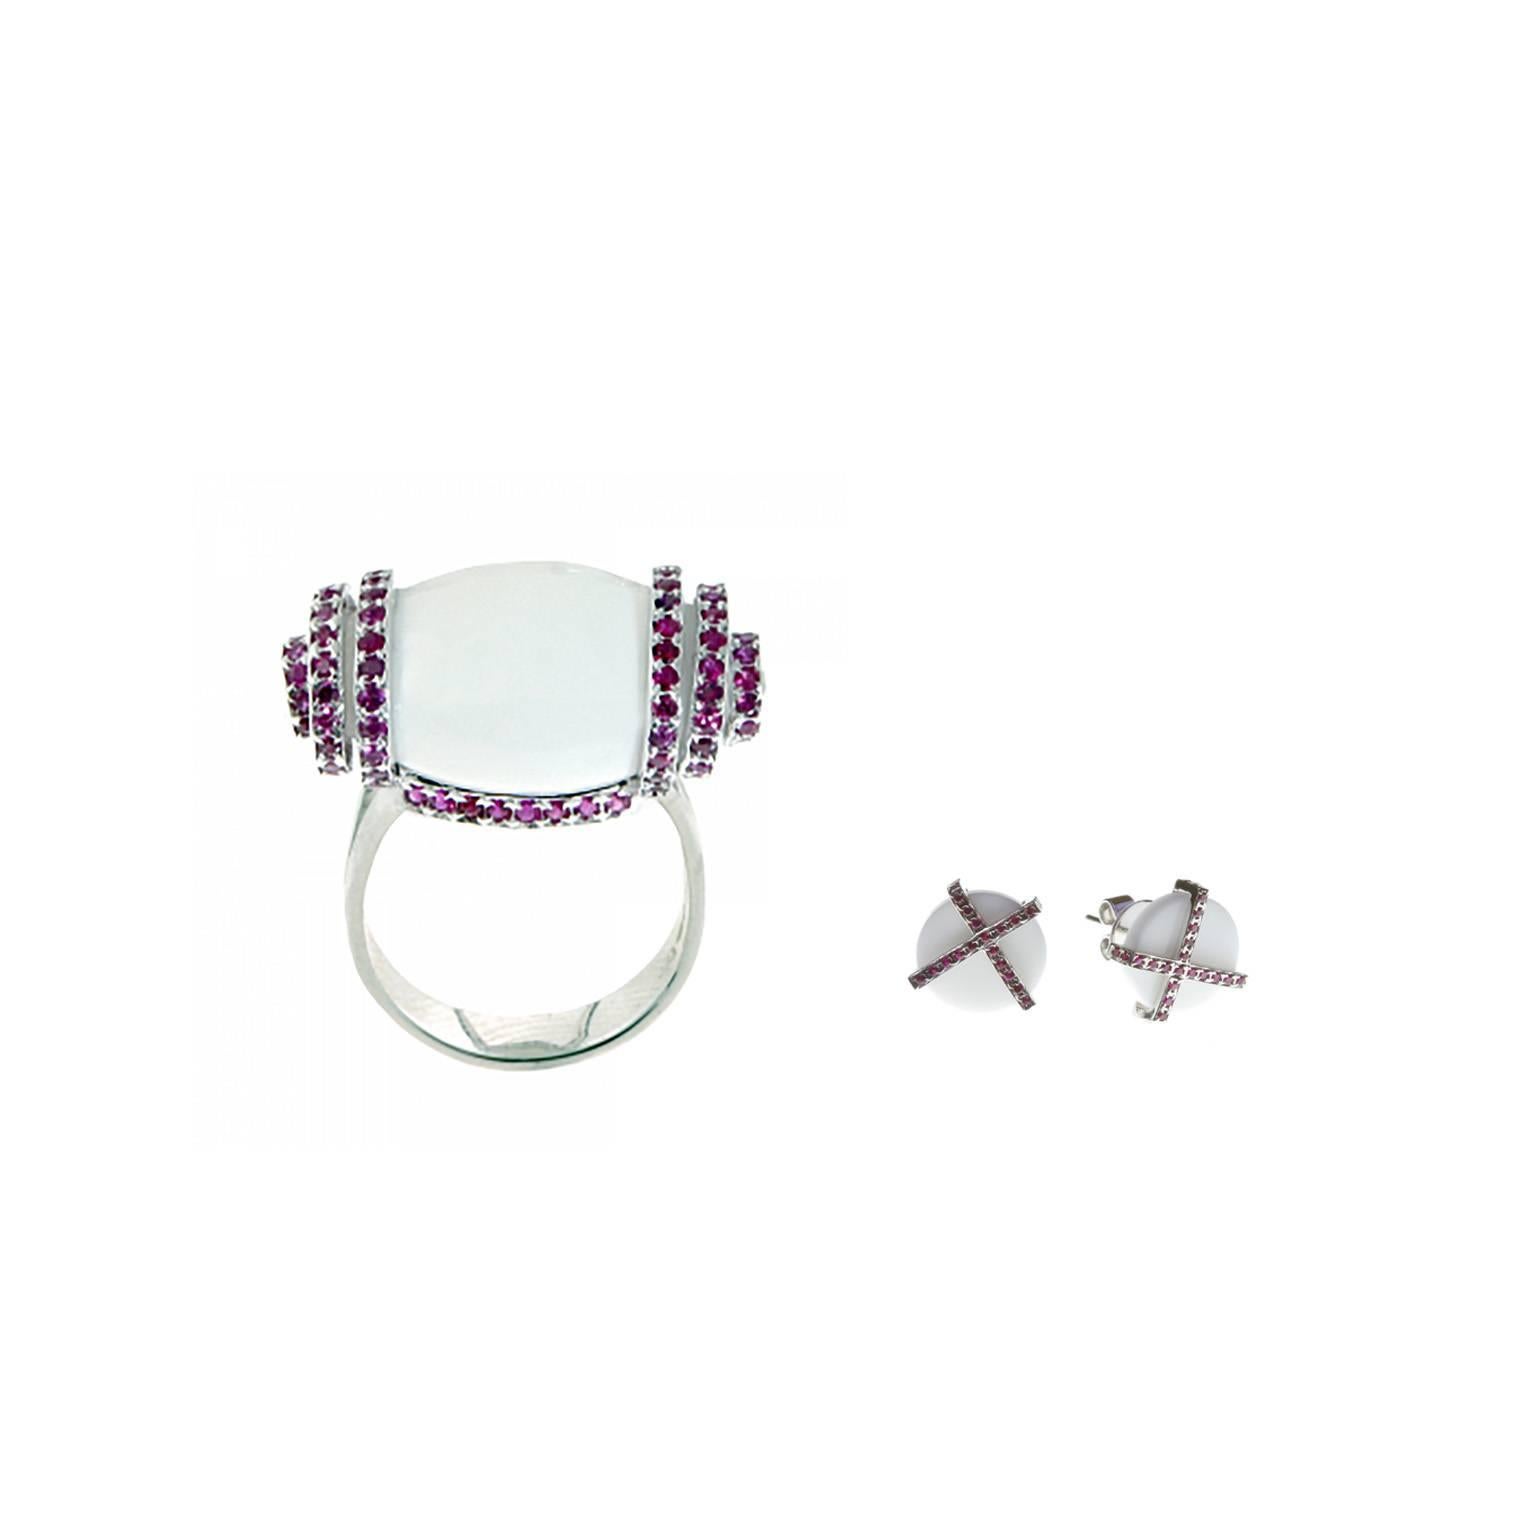 Youmna Fine Jewellery 18 Karat White Gold, Agate & Rubies Ring and Earrings Set For Sale